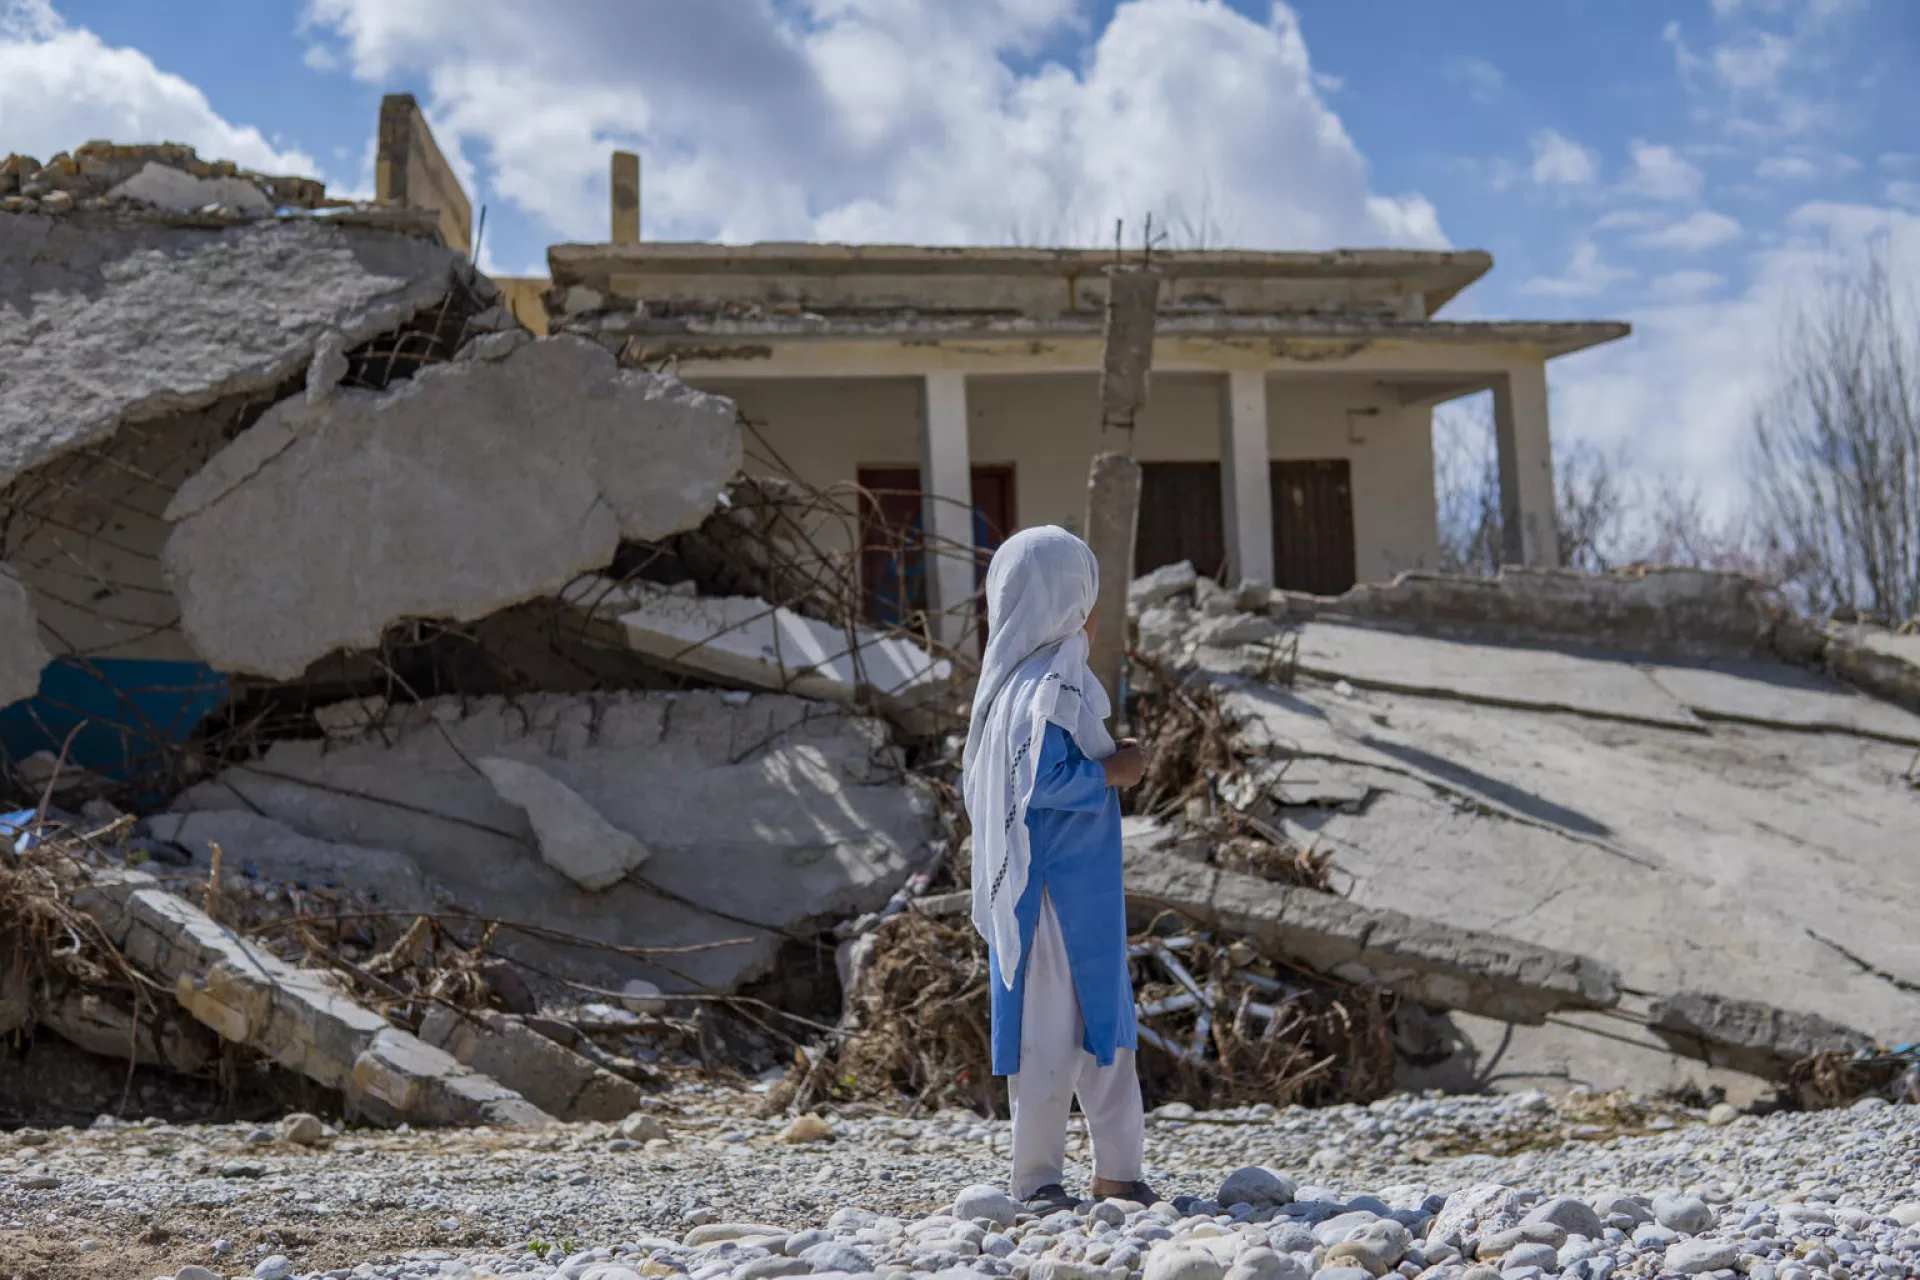 Pakistan. A girl stands near a school destroyed by the floods in Quetta District, Balochistan.